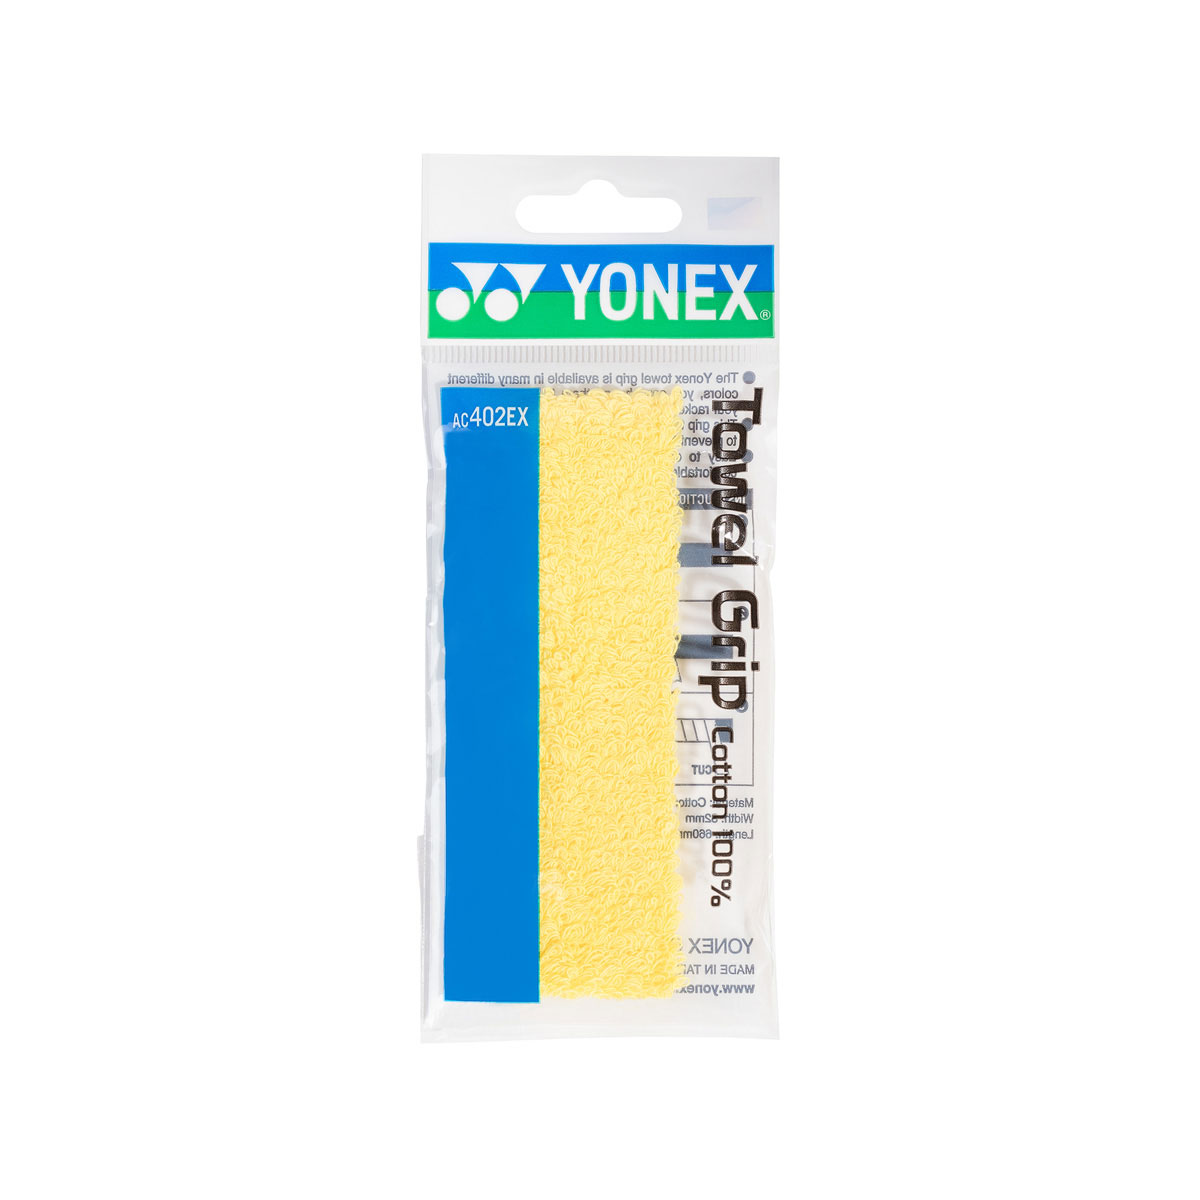 YONEX Frottee Griffband 1 Stk.